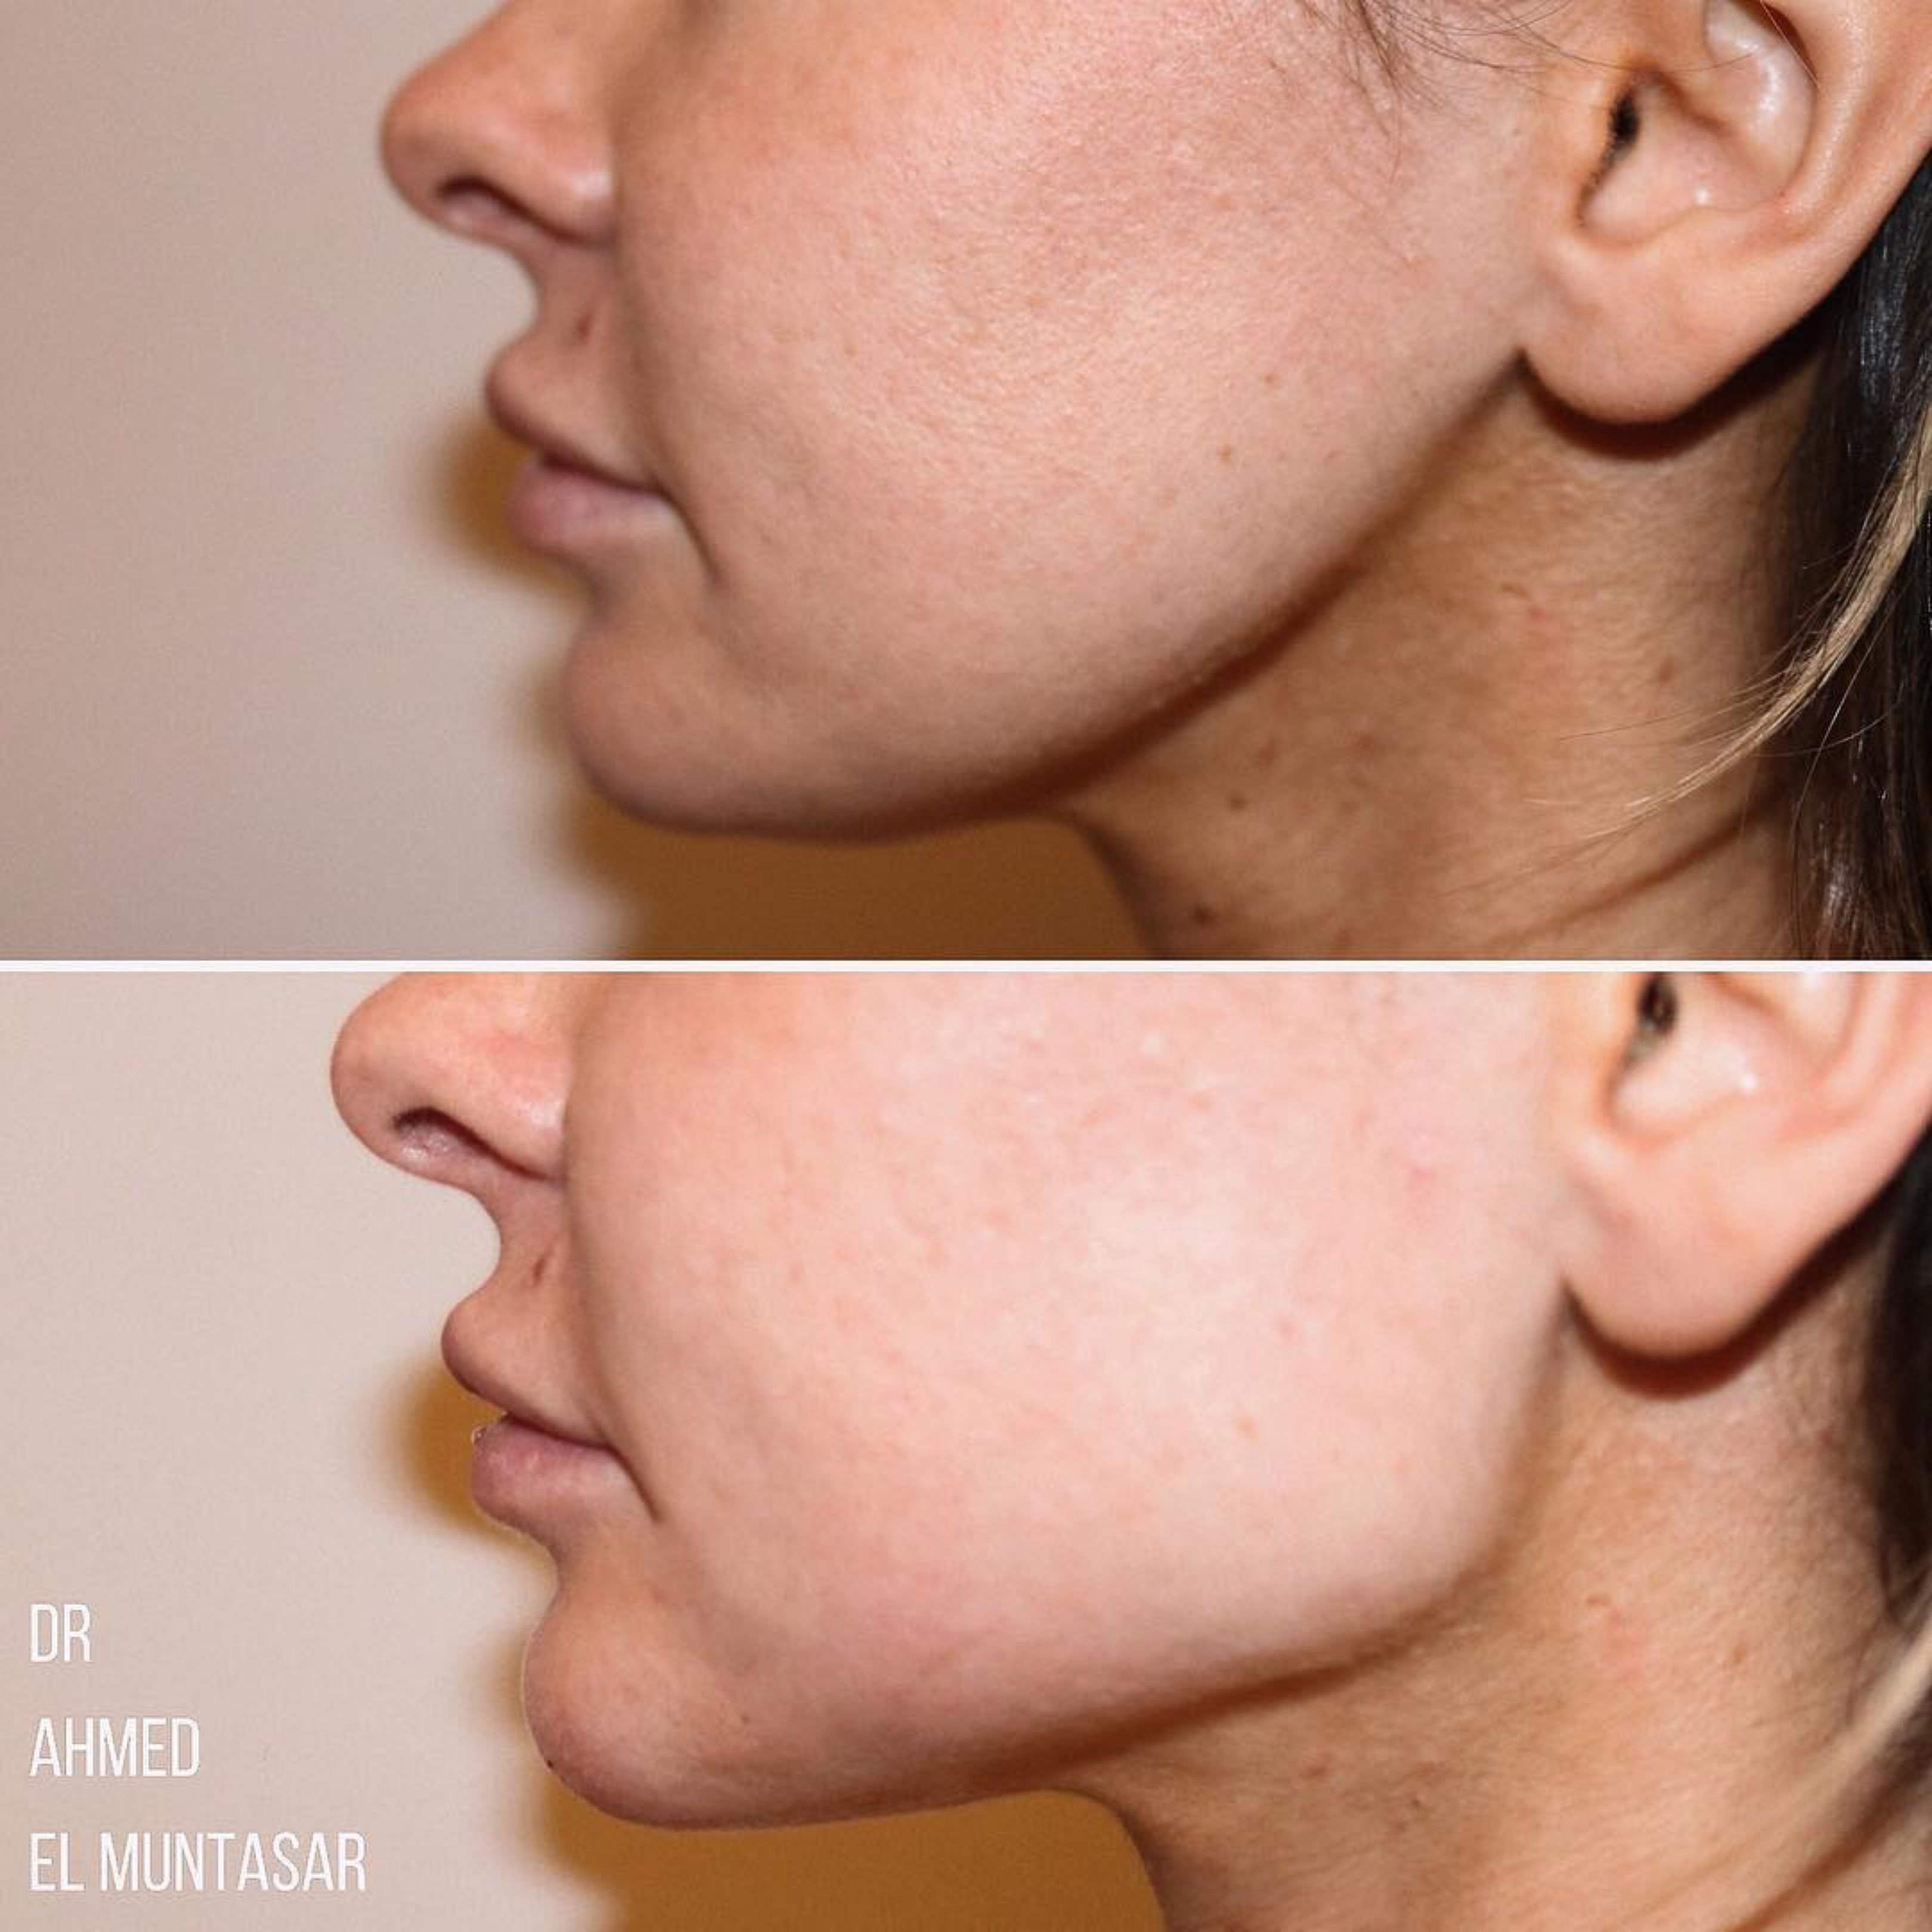 This image displays a split comparison of two profile views of the same person, with the top image labeled as "before" and the bottom as "after". The treatment performed was Jawline Filler treatment.